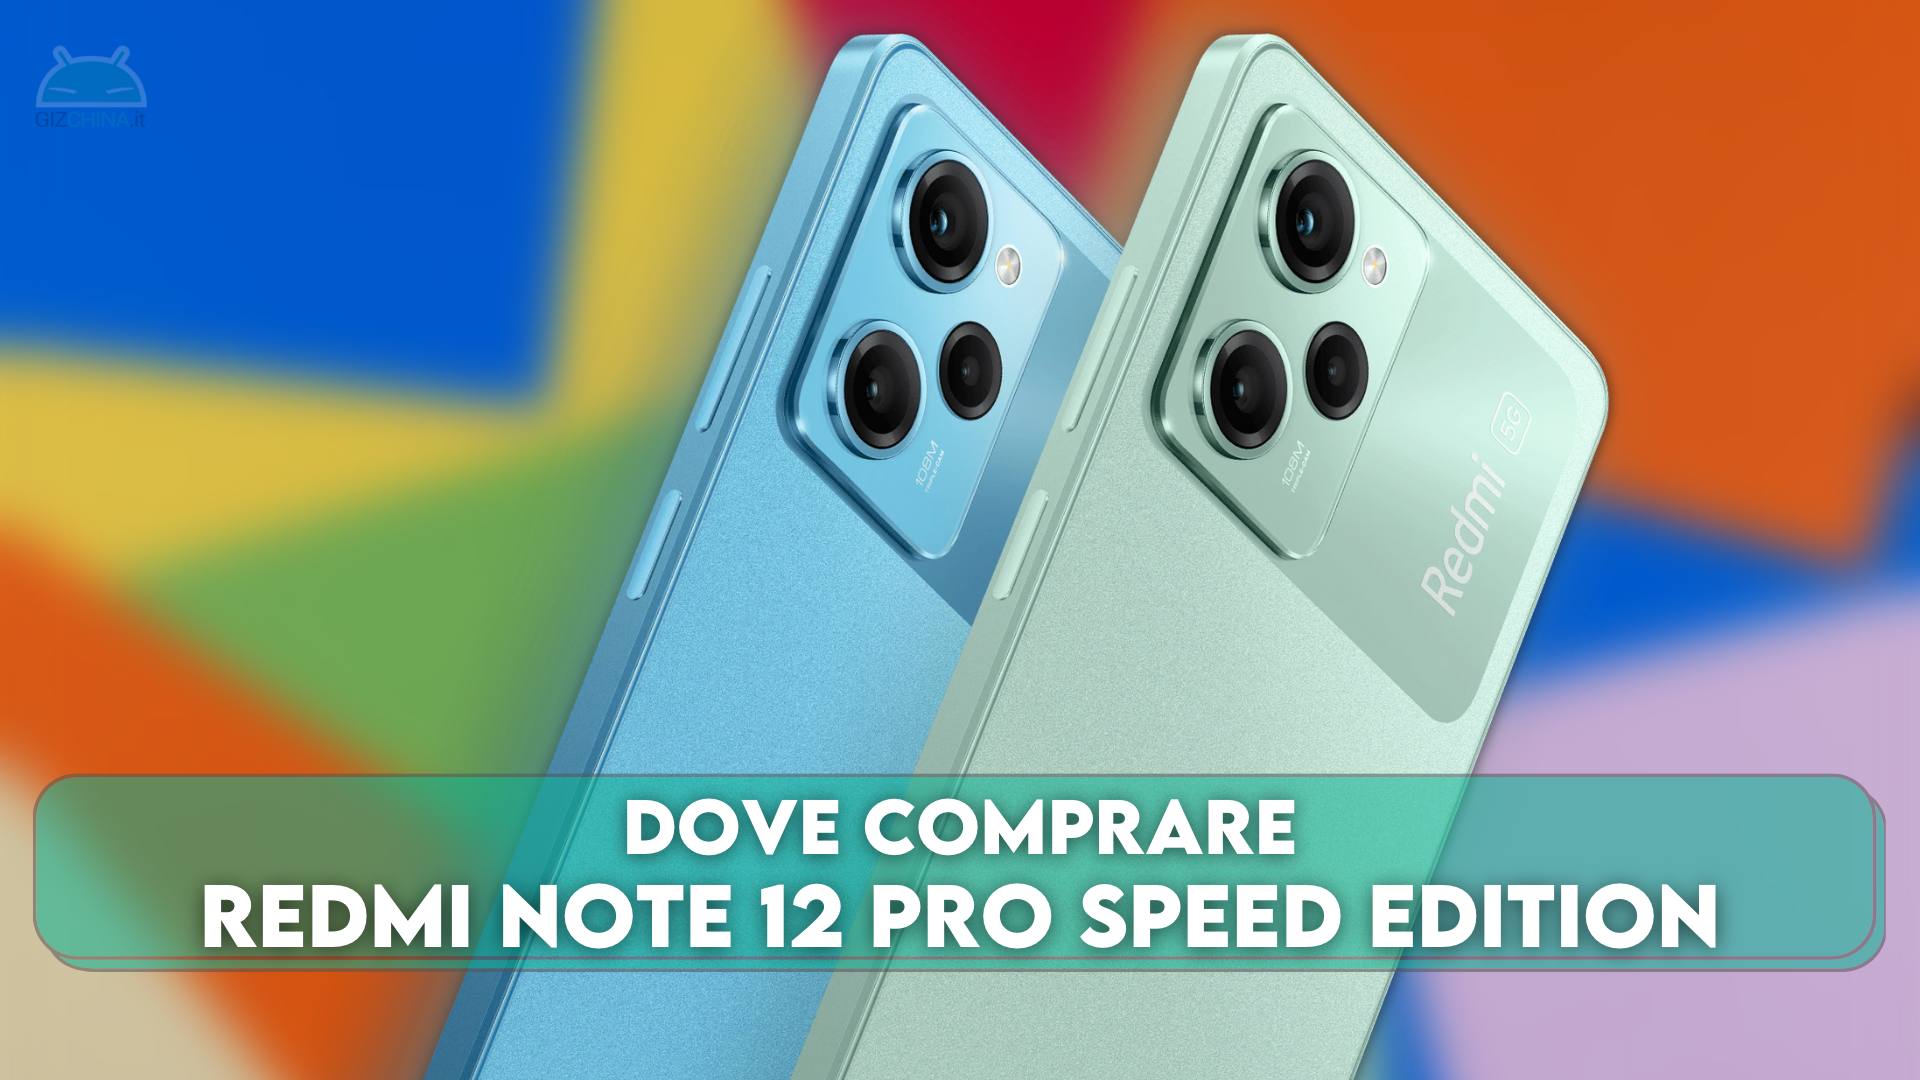 Note 12 speed edition